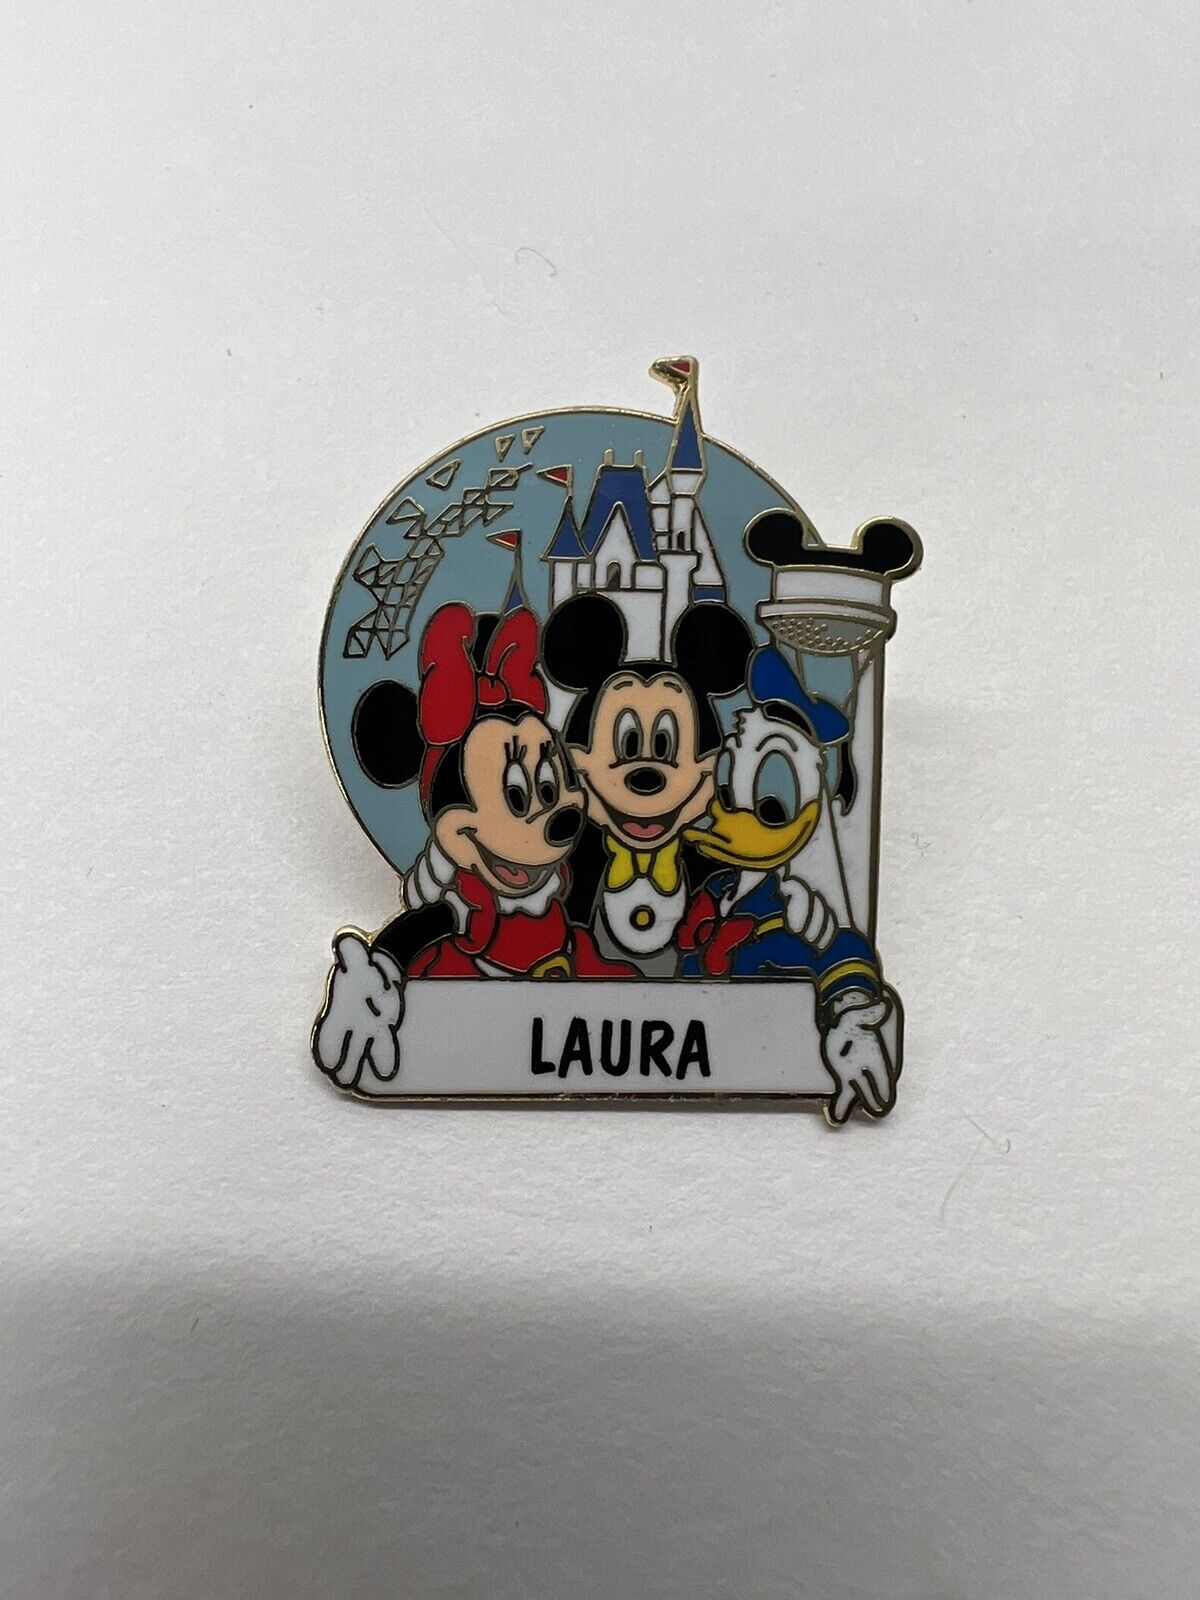 Vintage What Disney World Trading Pin Personalized “Laura” 90s Souvenir